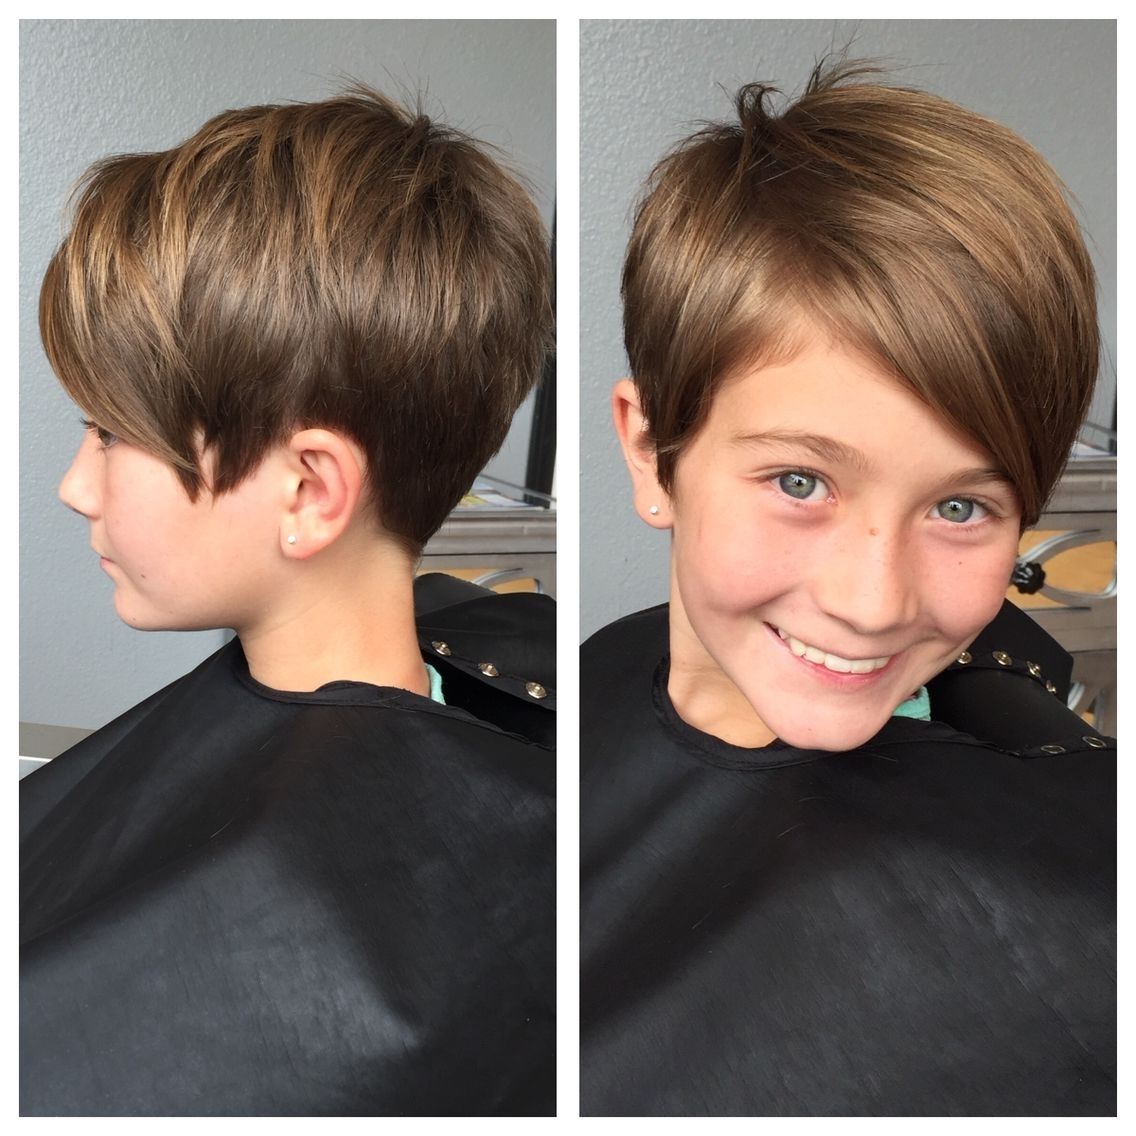 Kids Pixie Haircut | Hair | Pinterest | Pixie Haircut, Pixies And Within Latest Chick Undercut Pixie Hairstyles (View 5 of 15)